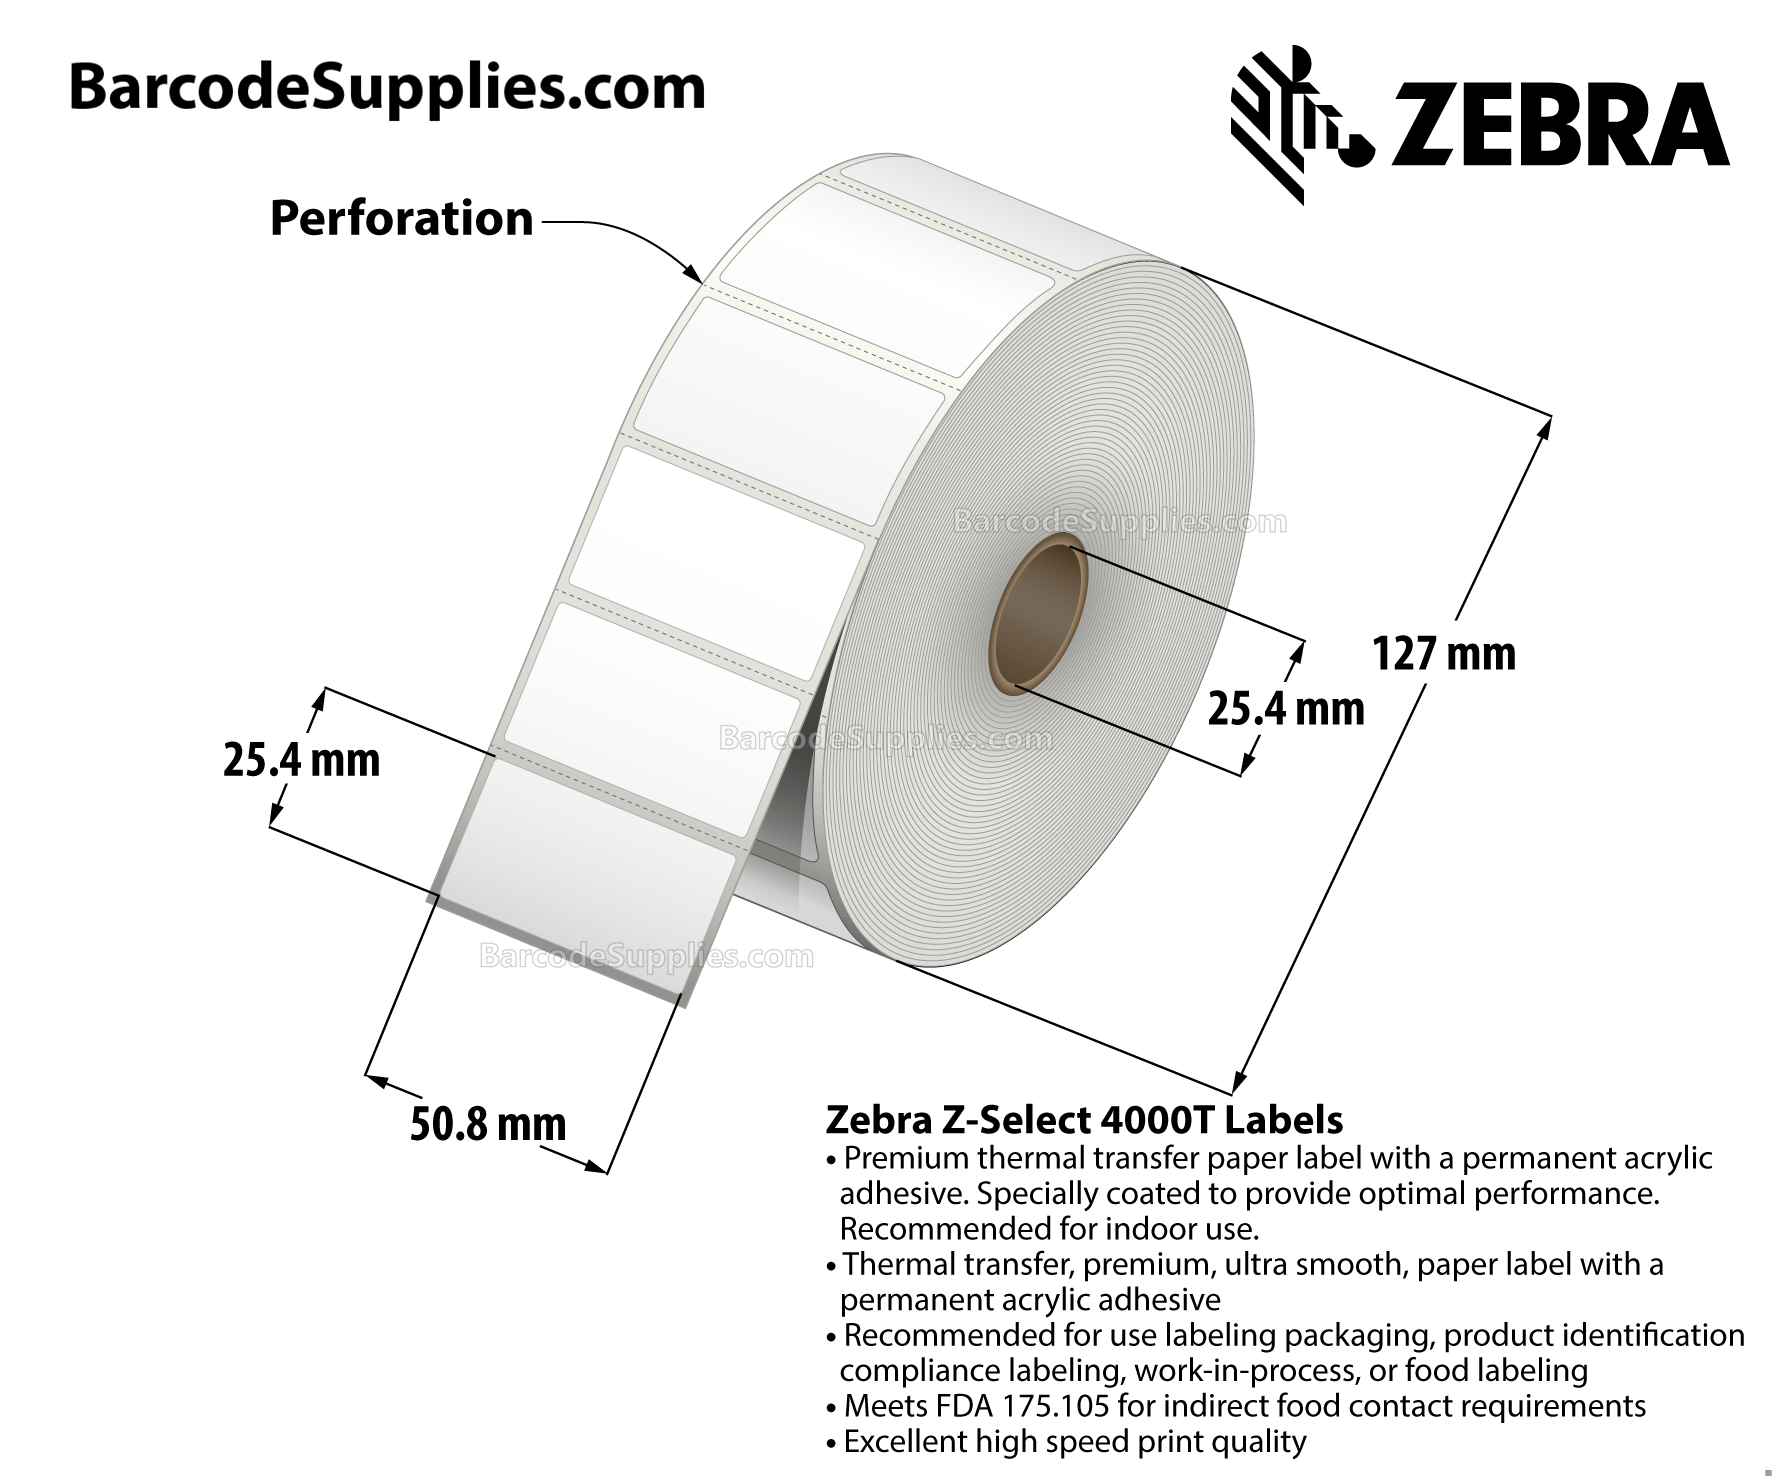 2 x 1 Thermal Transfer White Z-Select 4000T Labels With Permanent Adhesive - Perforated - 2260 Labels Per Roll - Carton Of 8 Rolls - 18080 Labels Total - MPN: 83259